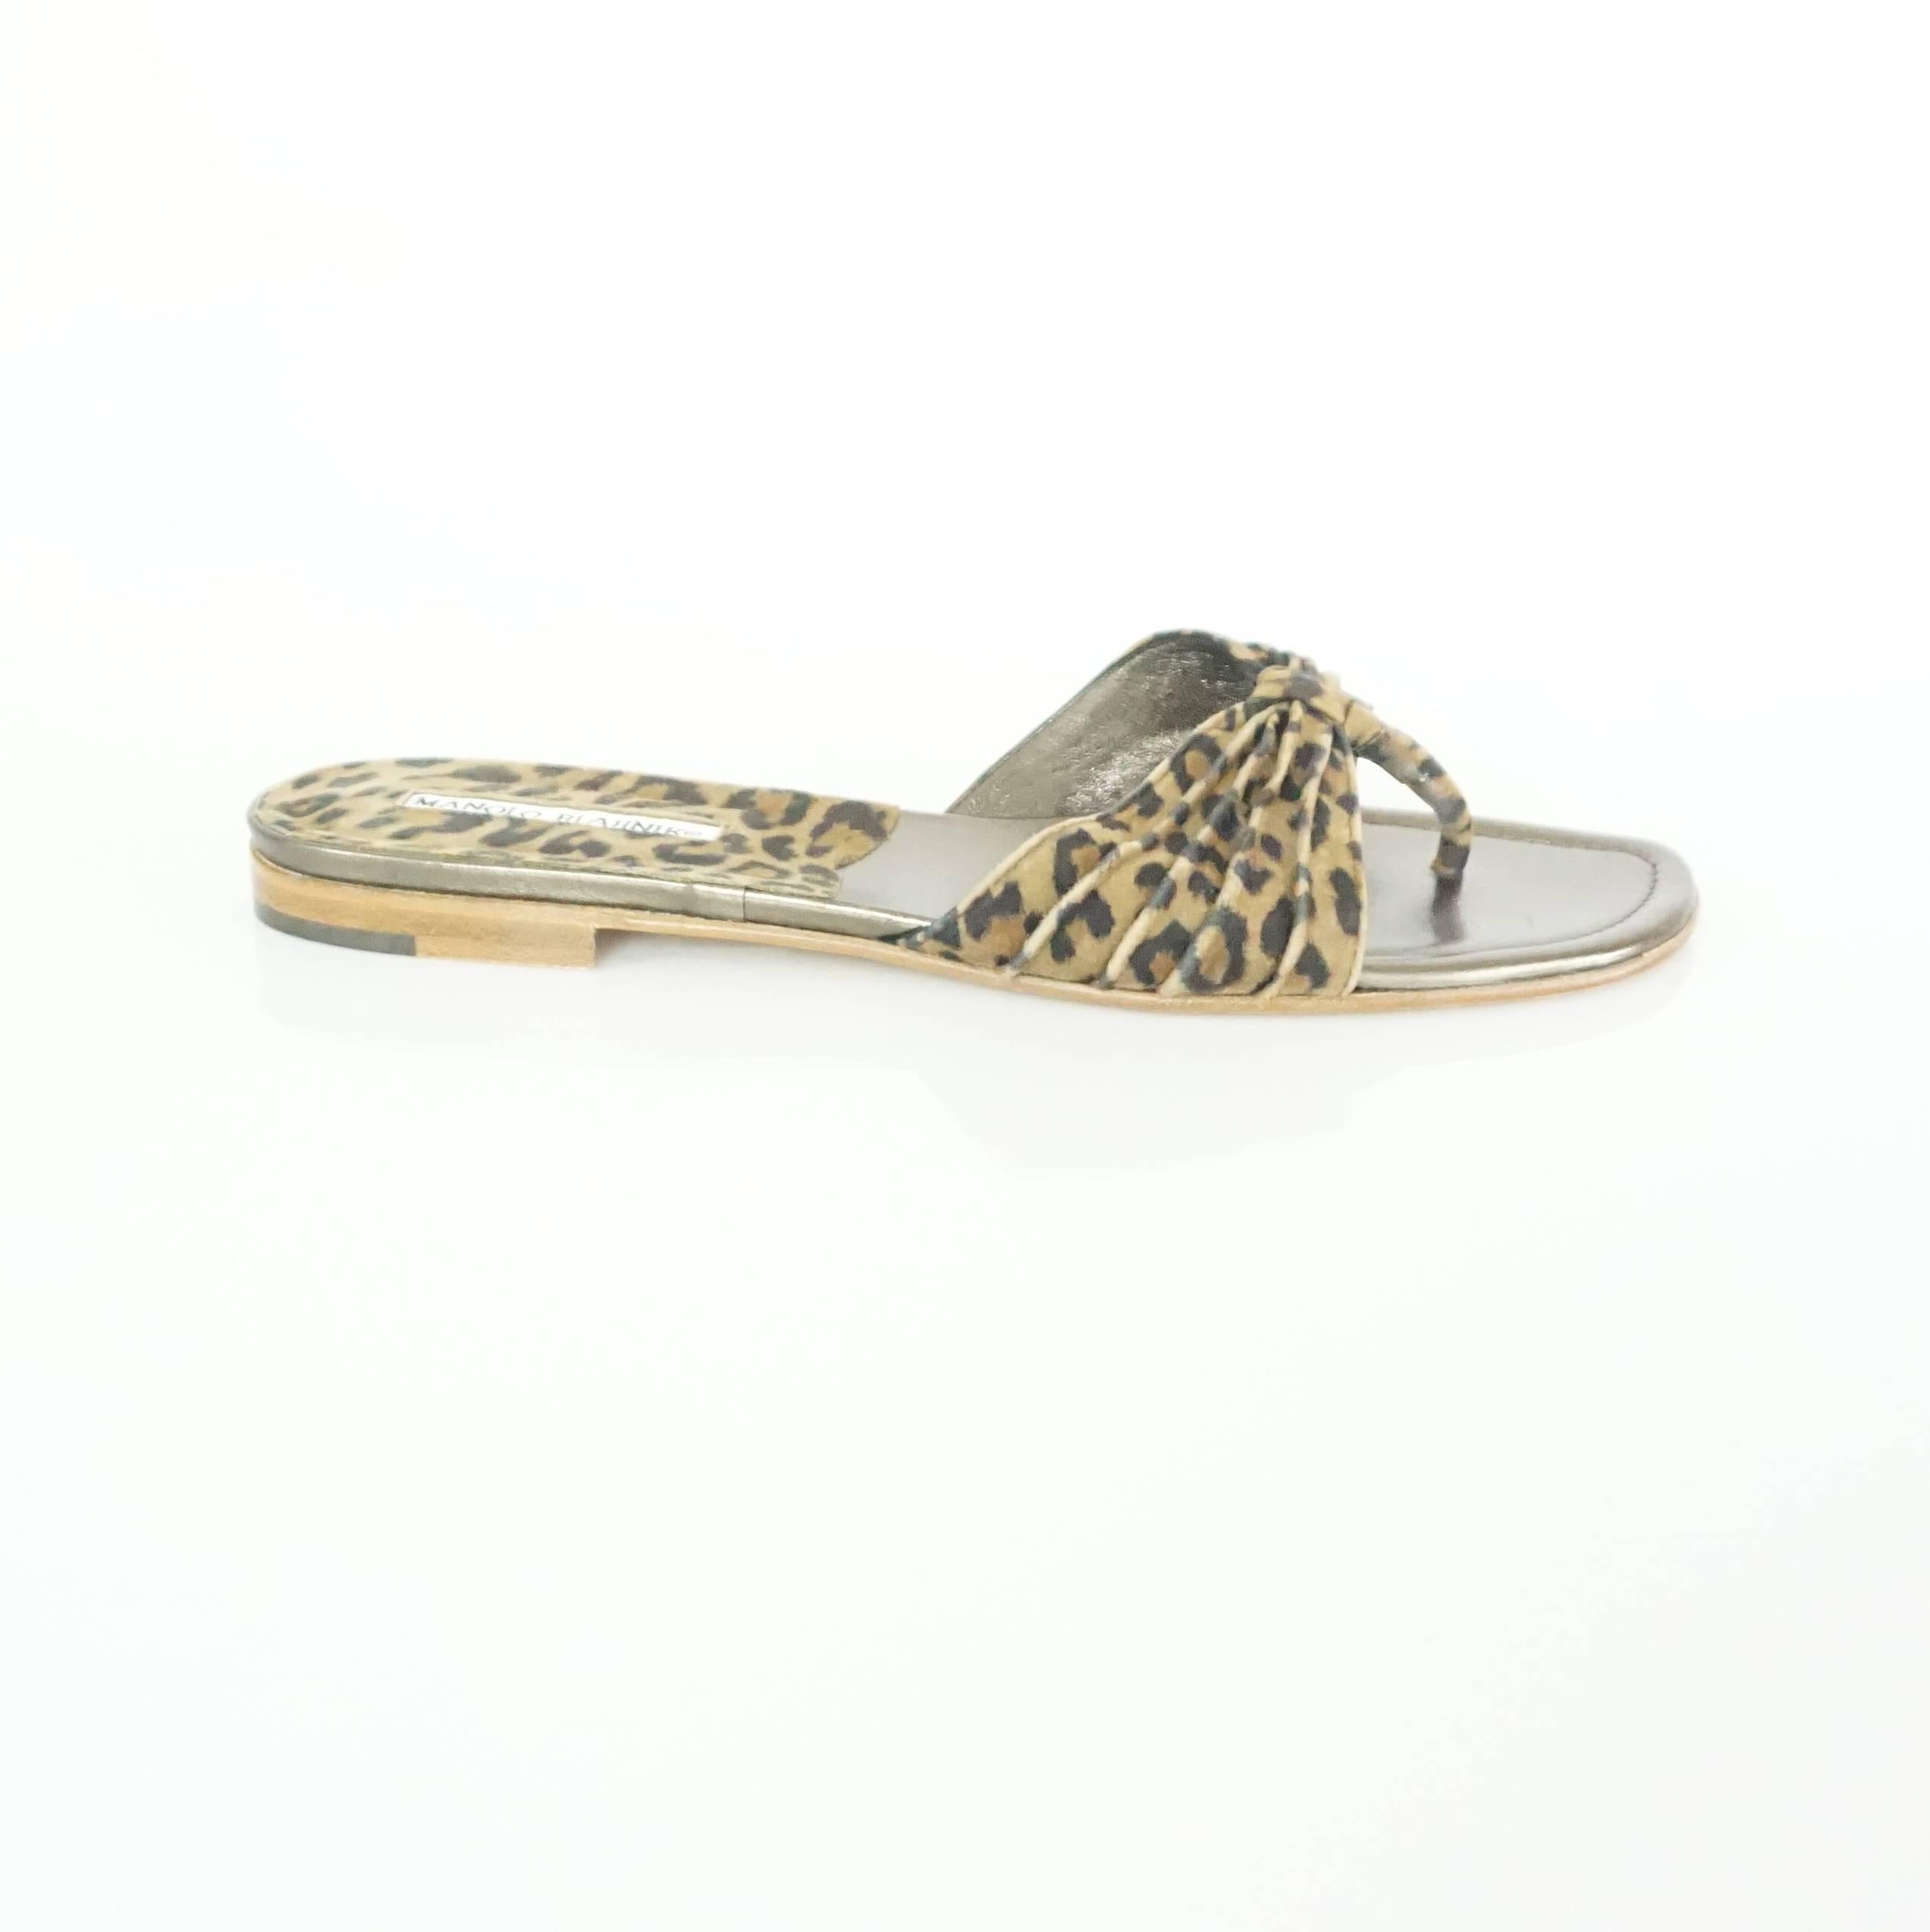 These Blahnik sandals are suede and feature an animal print. They are in excellent, like new, condition.